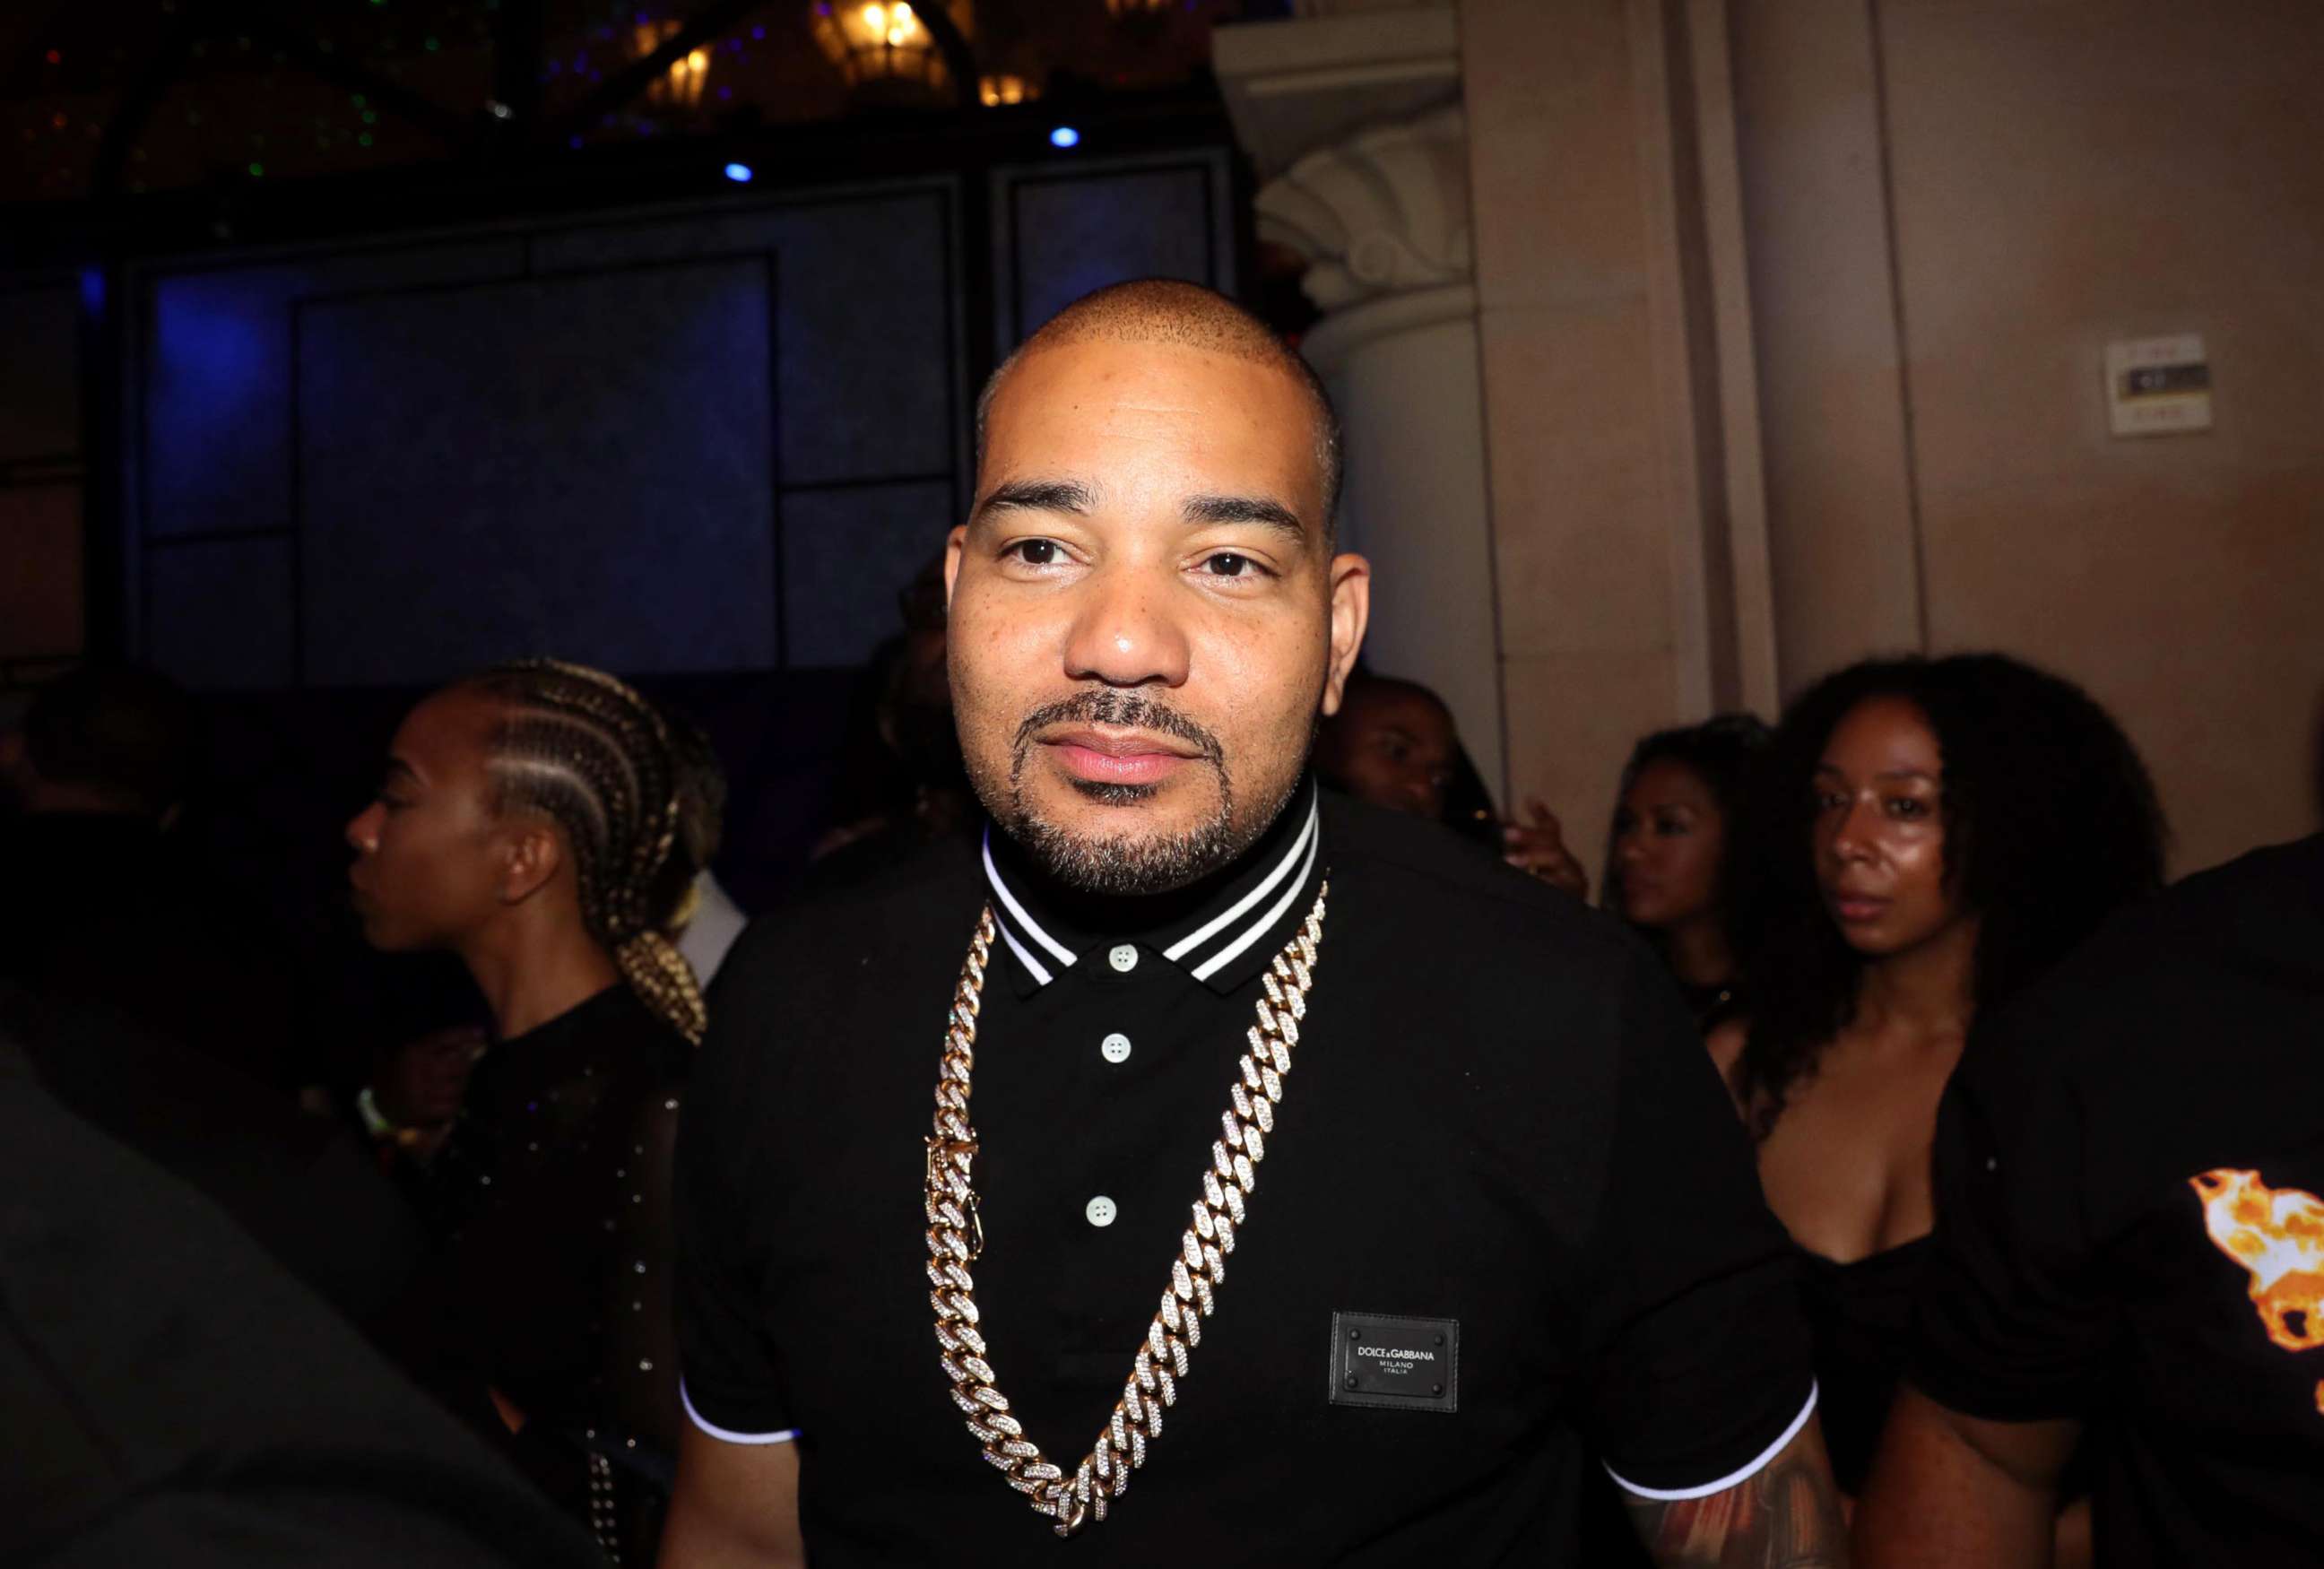 PHOTO: DJ Envy attends an event on July 7, 2019, in New Orleans.